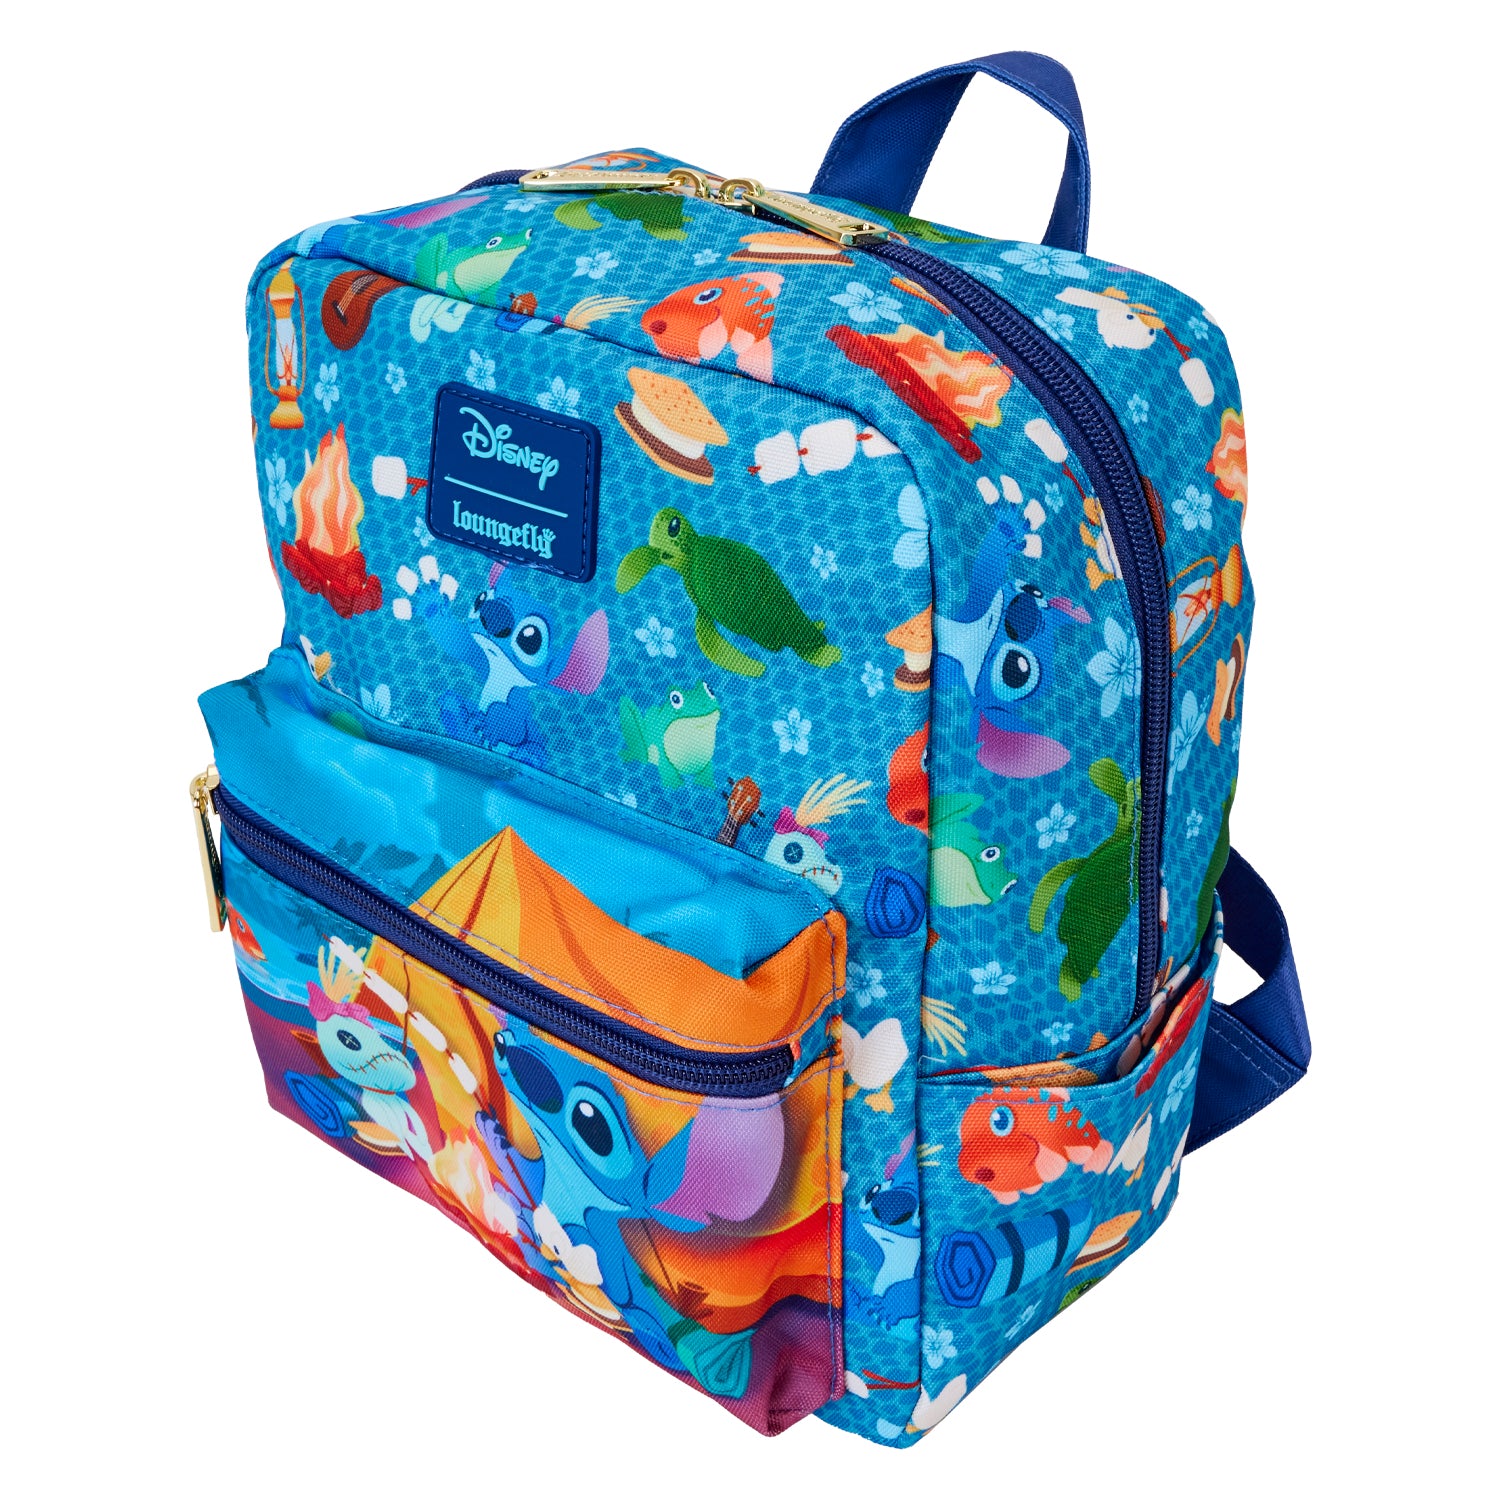 Loungefly Disney Lilo and Stitch Camping Cuties AOP Nylon Mini Backpack